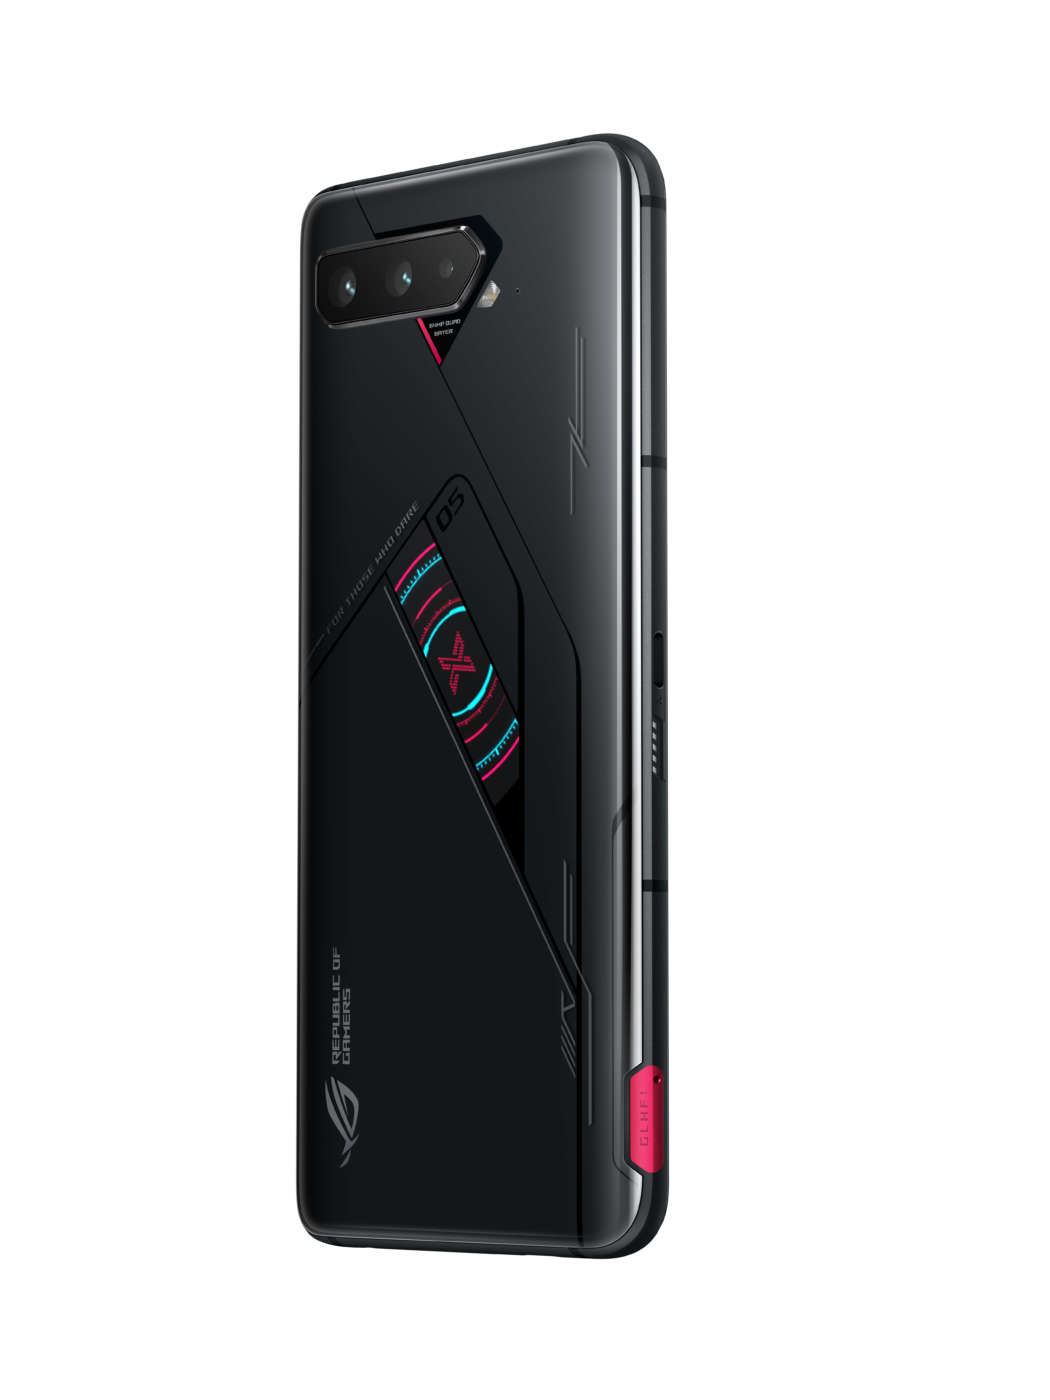  Rog Gaming Phone 5s e 5s Pro